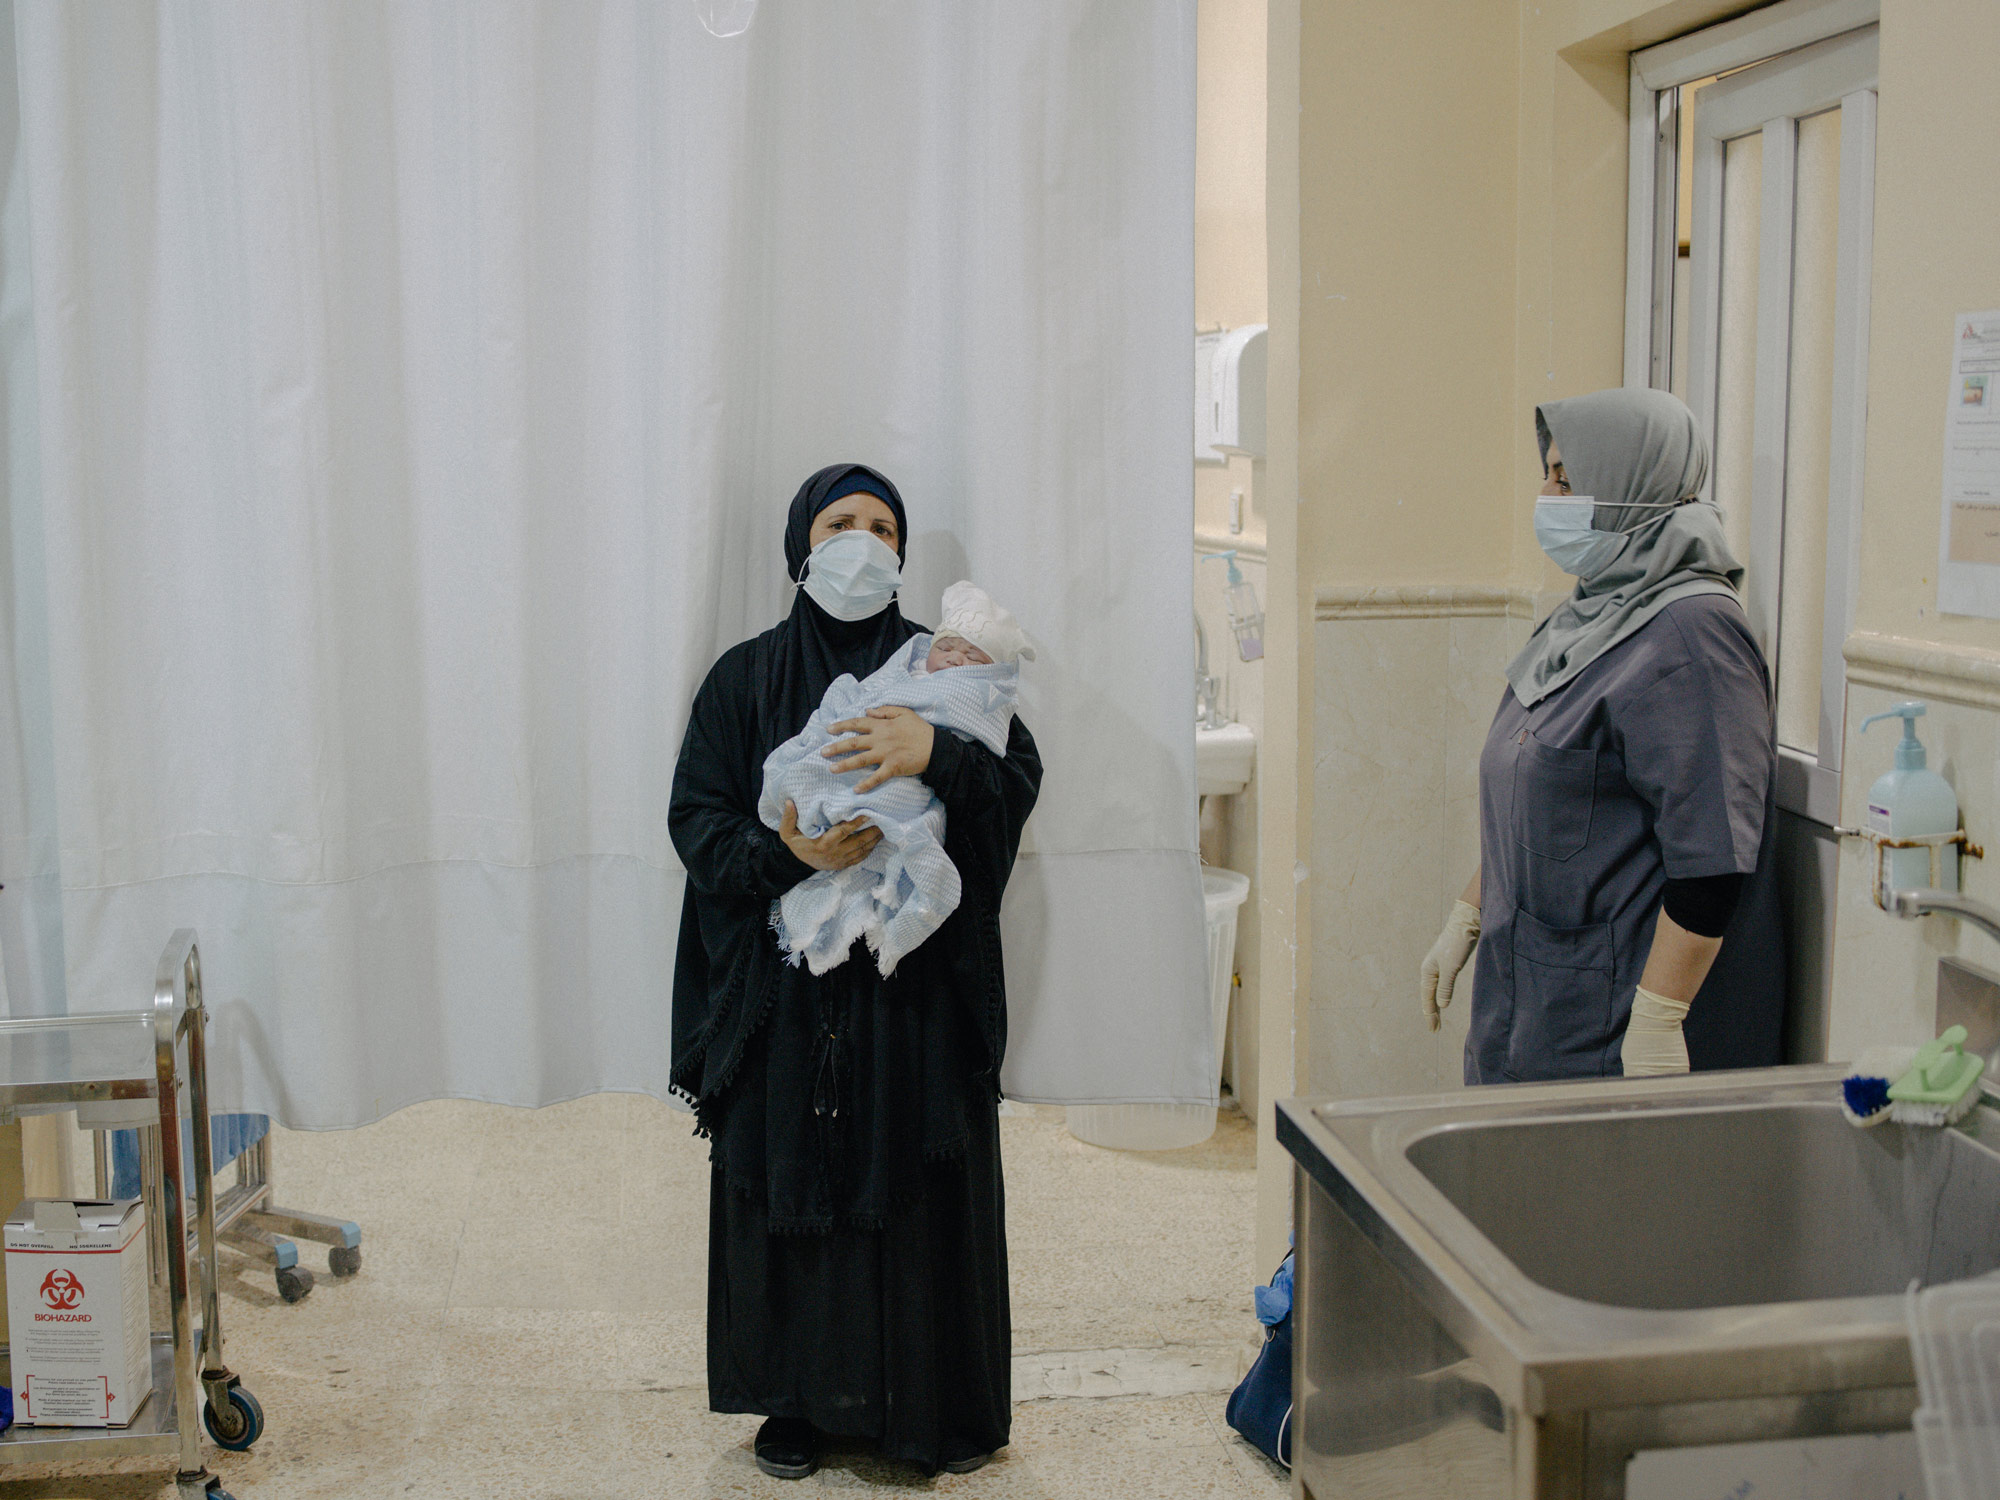 Mosul. 15 September 2021. In the maternity ward of MSF’s Nablus hospital, a woman holds her grandson. 